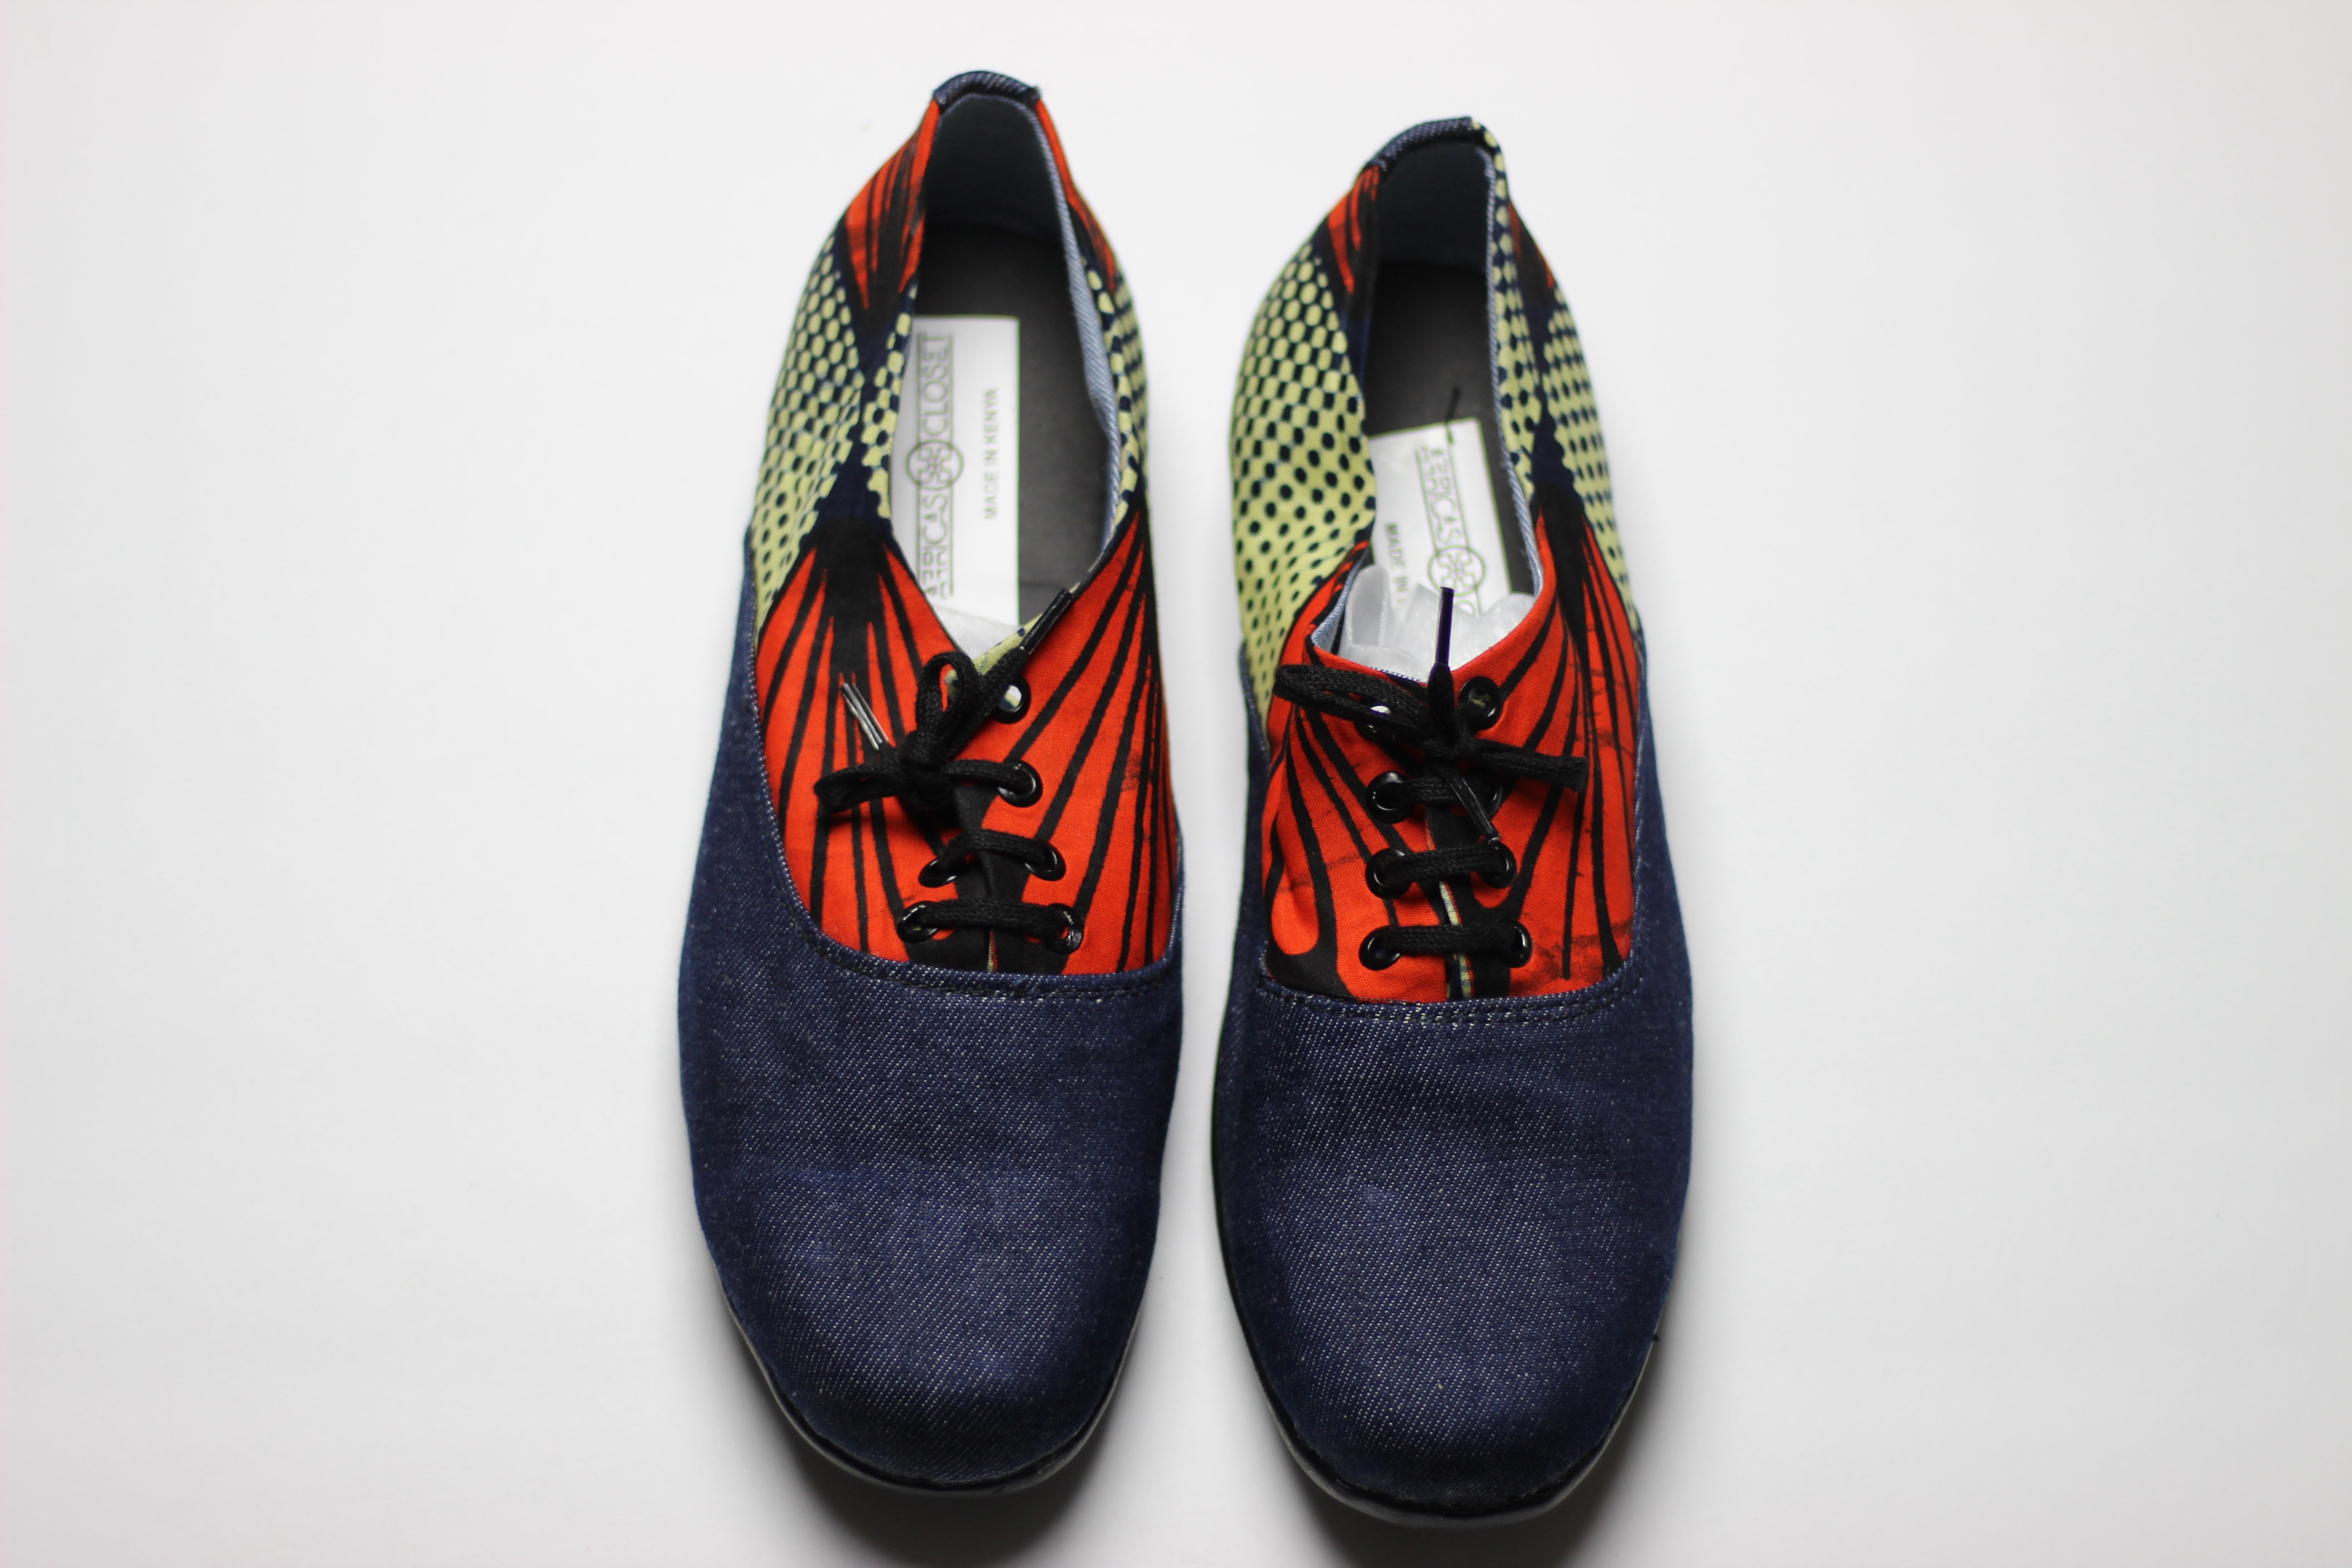 African Print /Ankara Flat Shoes /Loafers(with laces) Denim Detail - Red and Navy Blue Floral Print. - Africas Closet